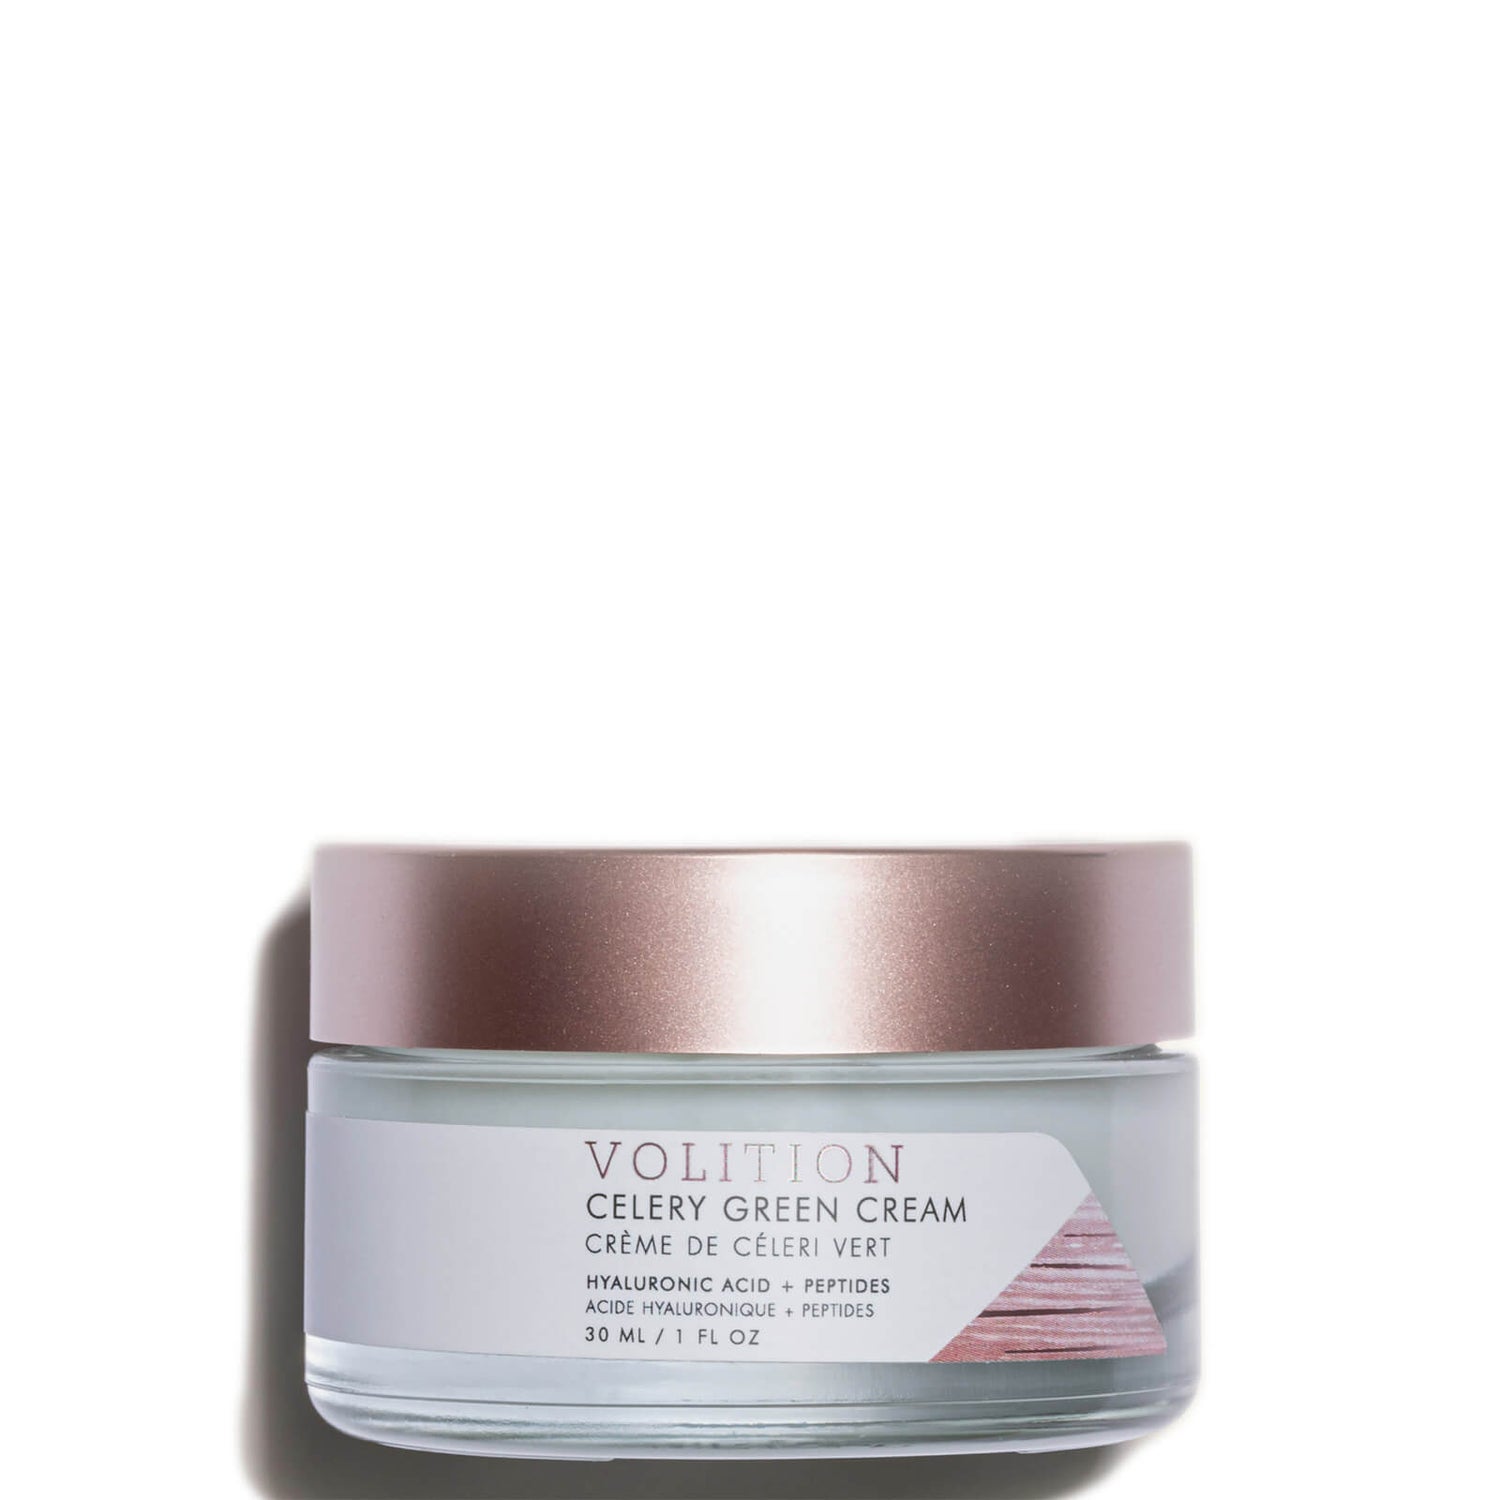 Volition Beauty Travel Size Celery Green Cream with Hyaluronic Acid and Peptides 1 oz